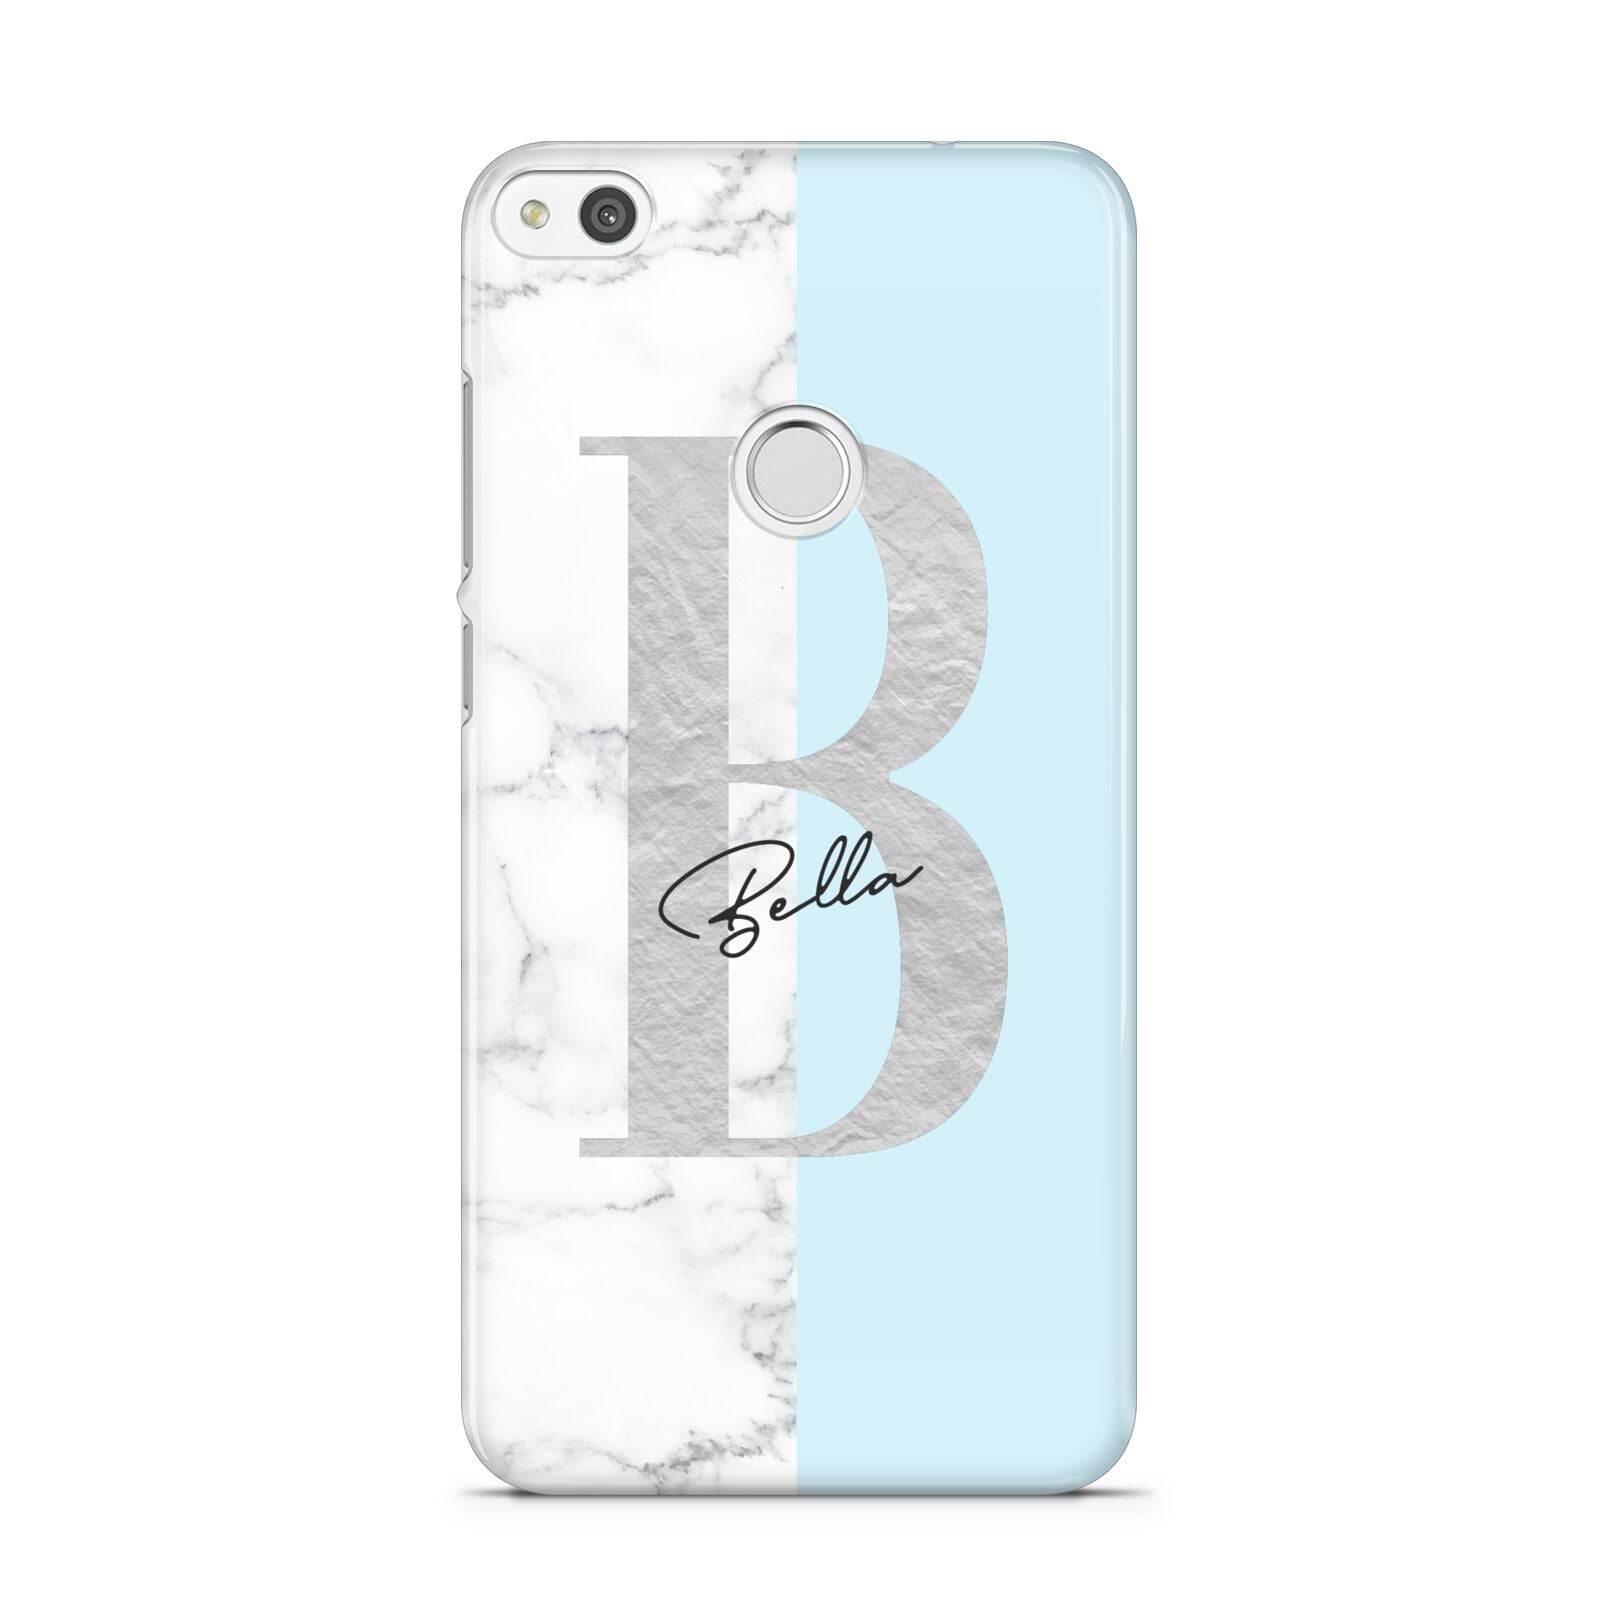 Personalised Chrome Marble Huawei P8 Lite Case